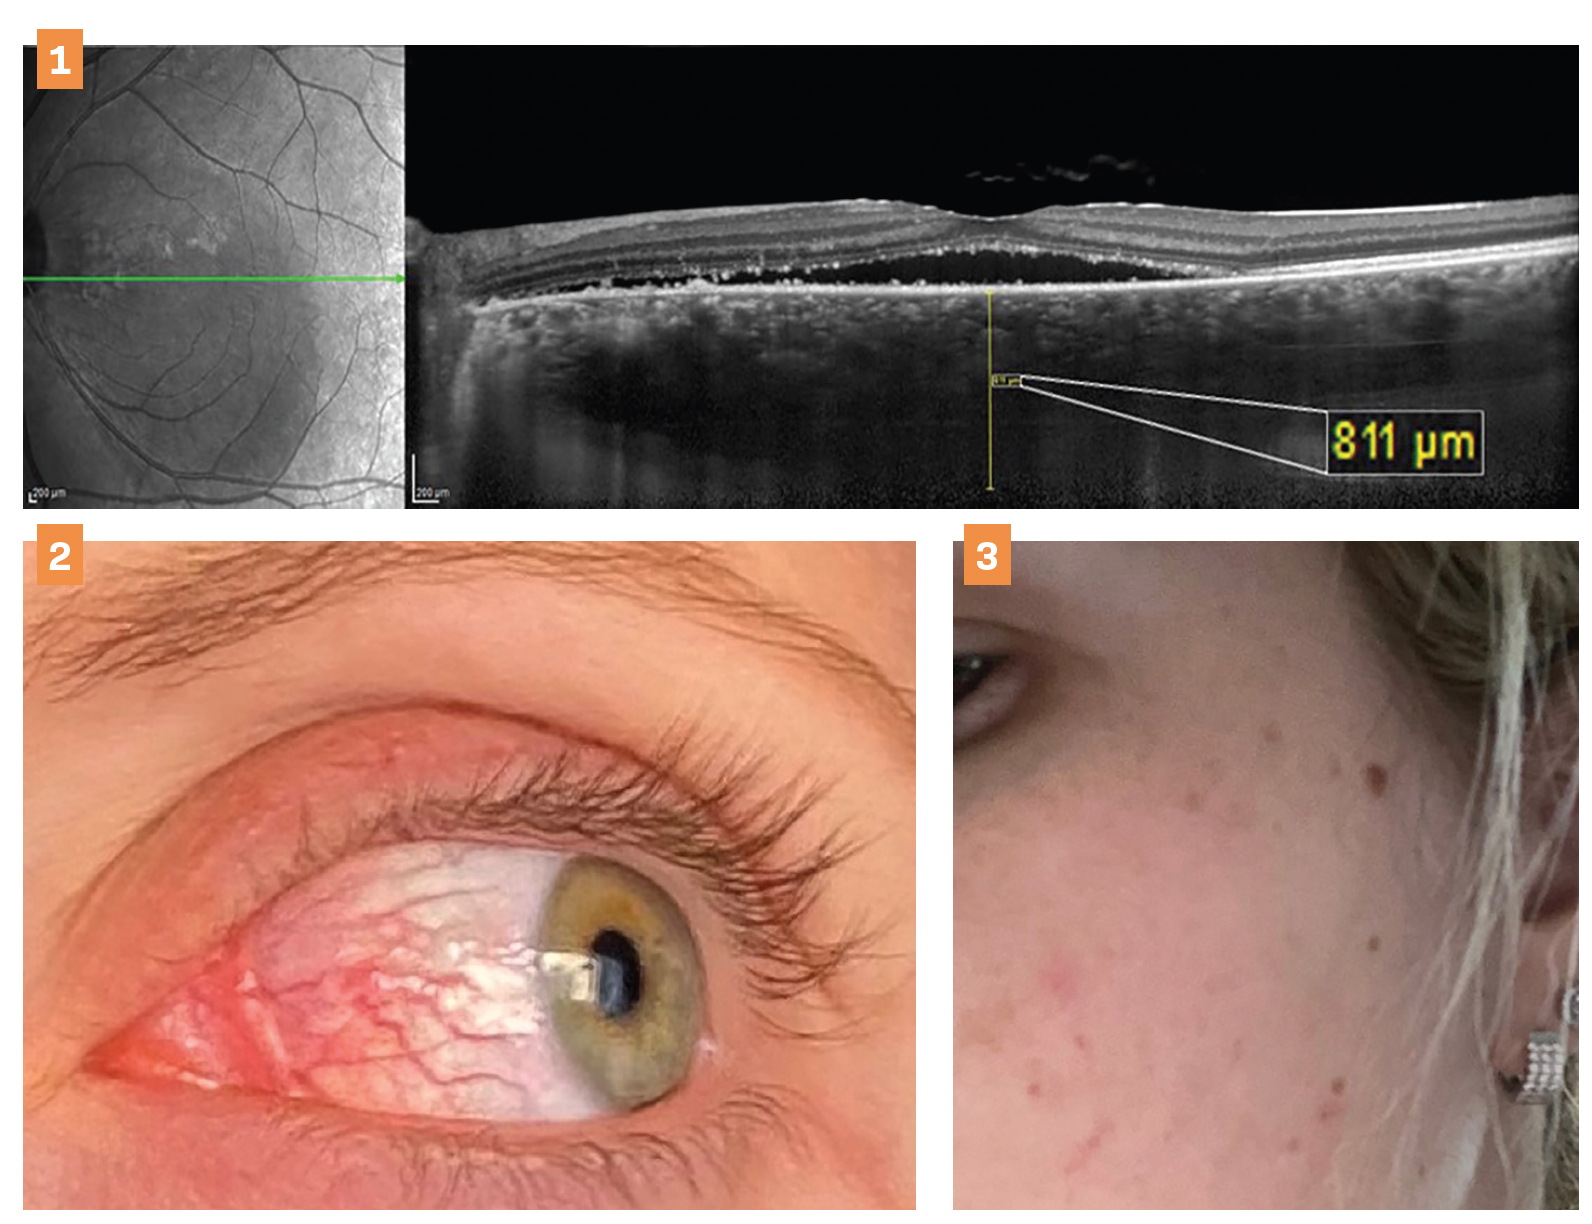 Figure 1. A 28-year-old woman in her second trimester came in complaining of visual loss. This patient received a diagnosis of central serous retinopathy that eventually self-resolved. Image courtesy of Suzanne W. Sherman, OD, FAAO, FSLS, Dip ABO.

Figure 2. Episcleritis commonly seen in patients with underlying autoimmune conditions. Image courtesy of Christina Cherny, OD.

Figure 3. A 30-year-old woman presents 3 months' post partum with “mask of pregnancy.” This is prophylactic PRP performed on a patient with type 1 diabetes who was pregnant. Image courtesy of Royce Chen, MD.